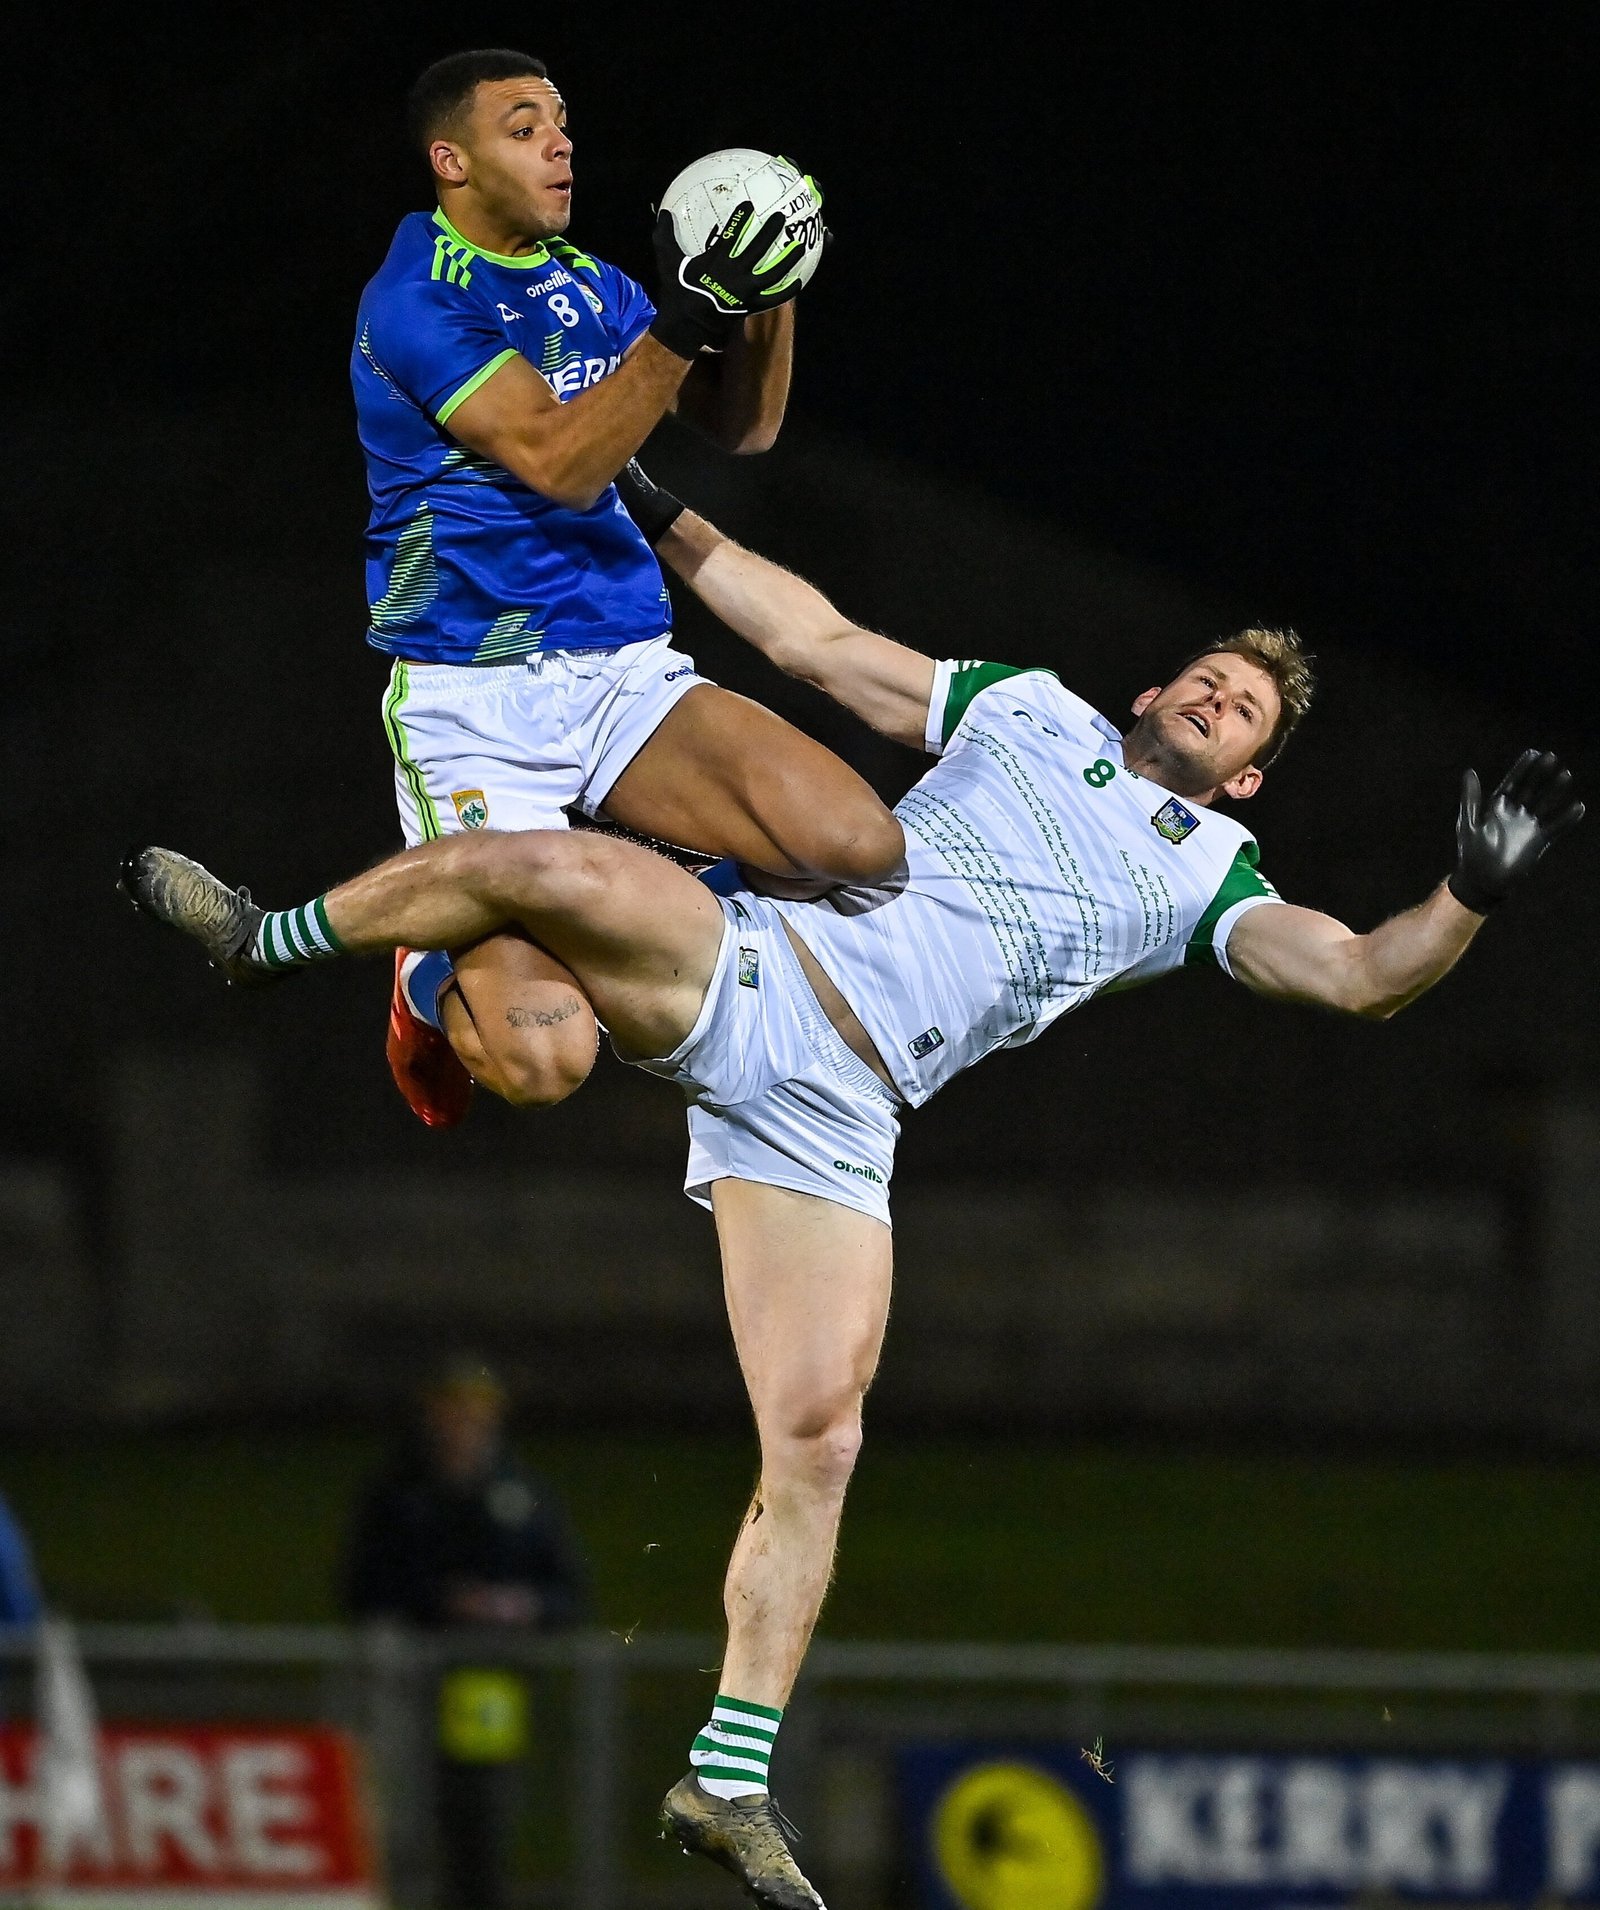 Image - Fetching high on his first involvement with the Kerry seniors